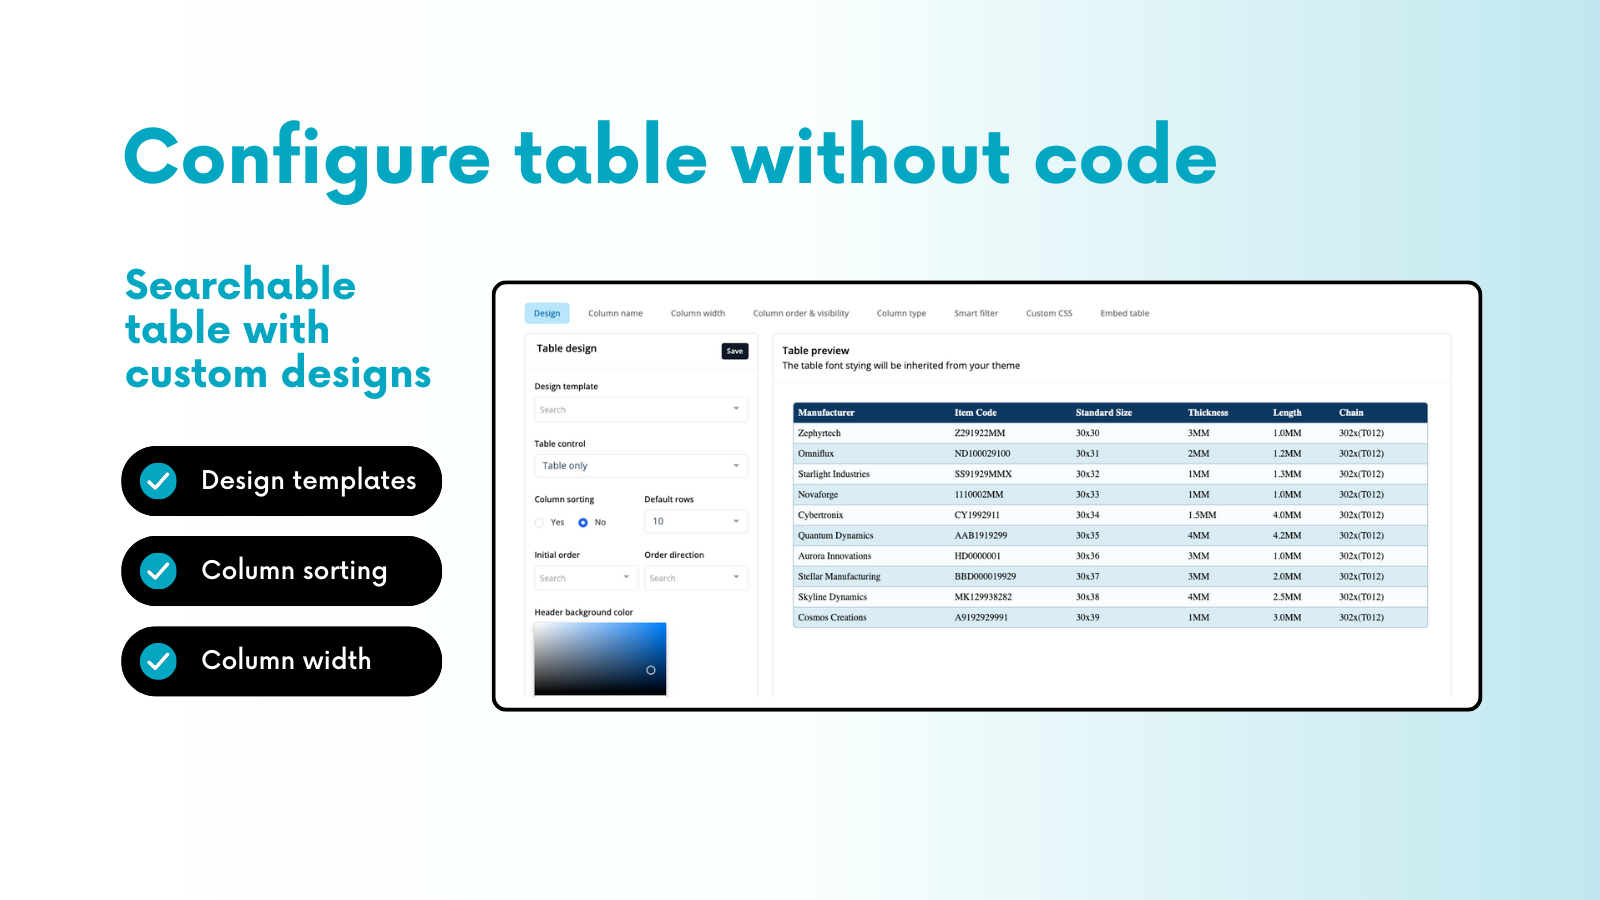 Flexible options to customise the data table